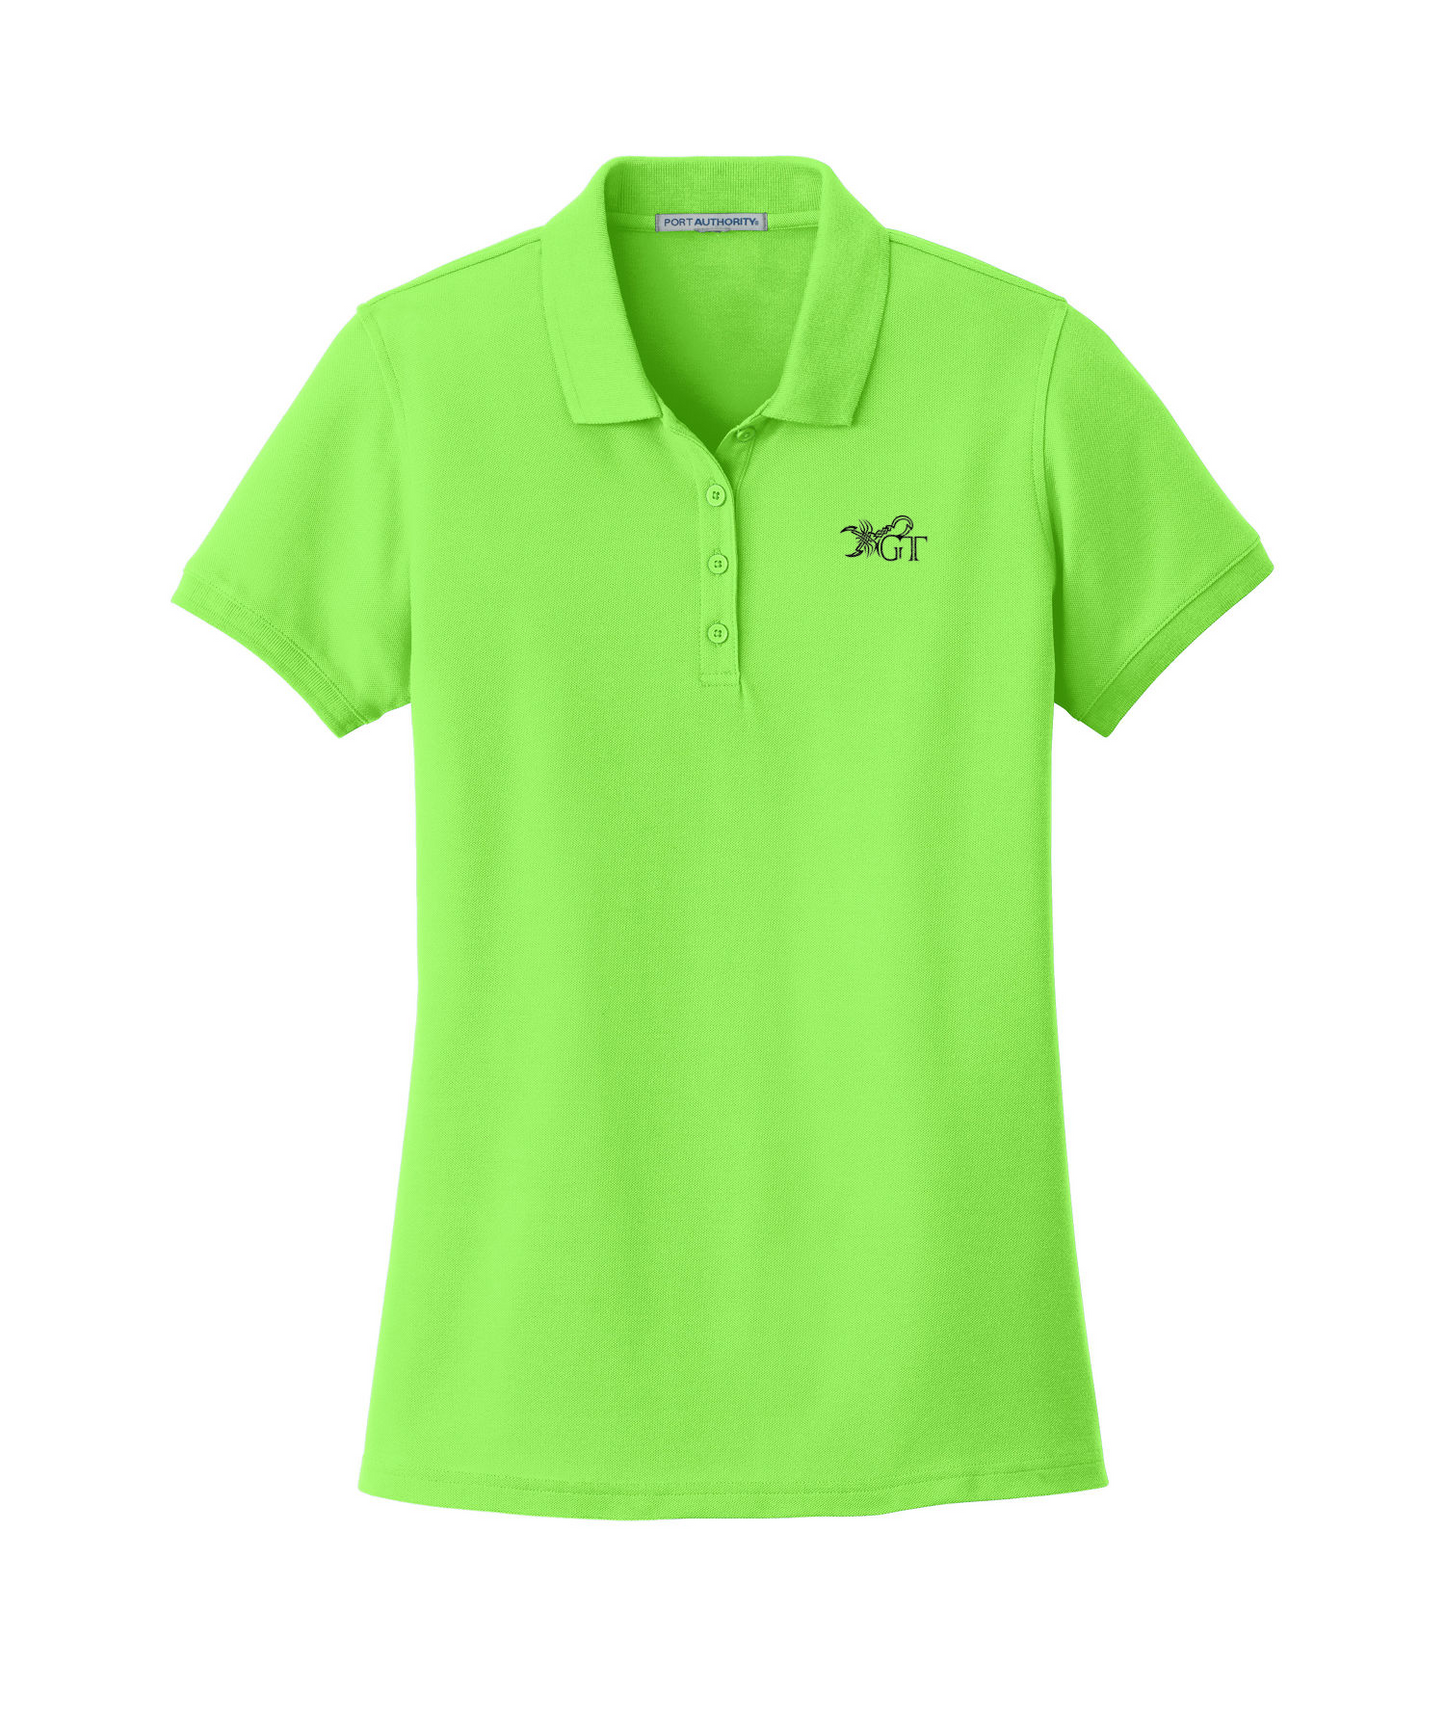 GT Scorpion Women's Embroidered Polo